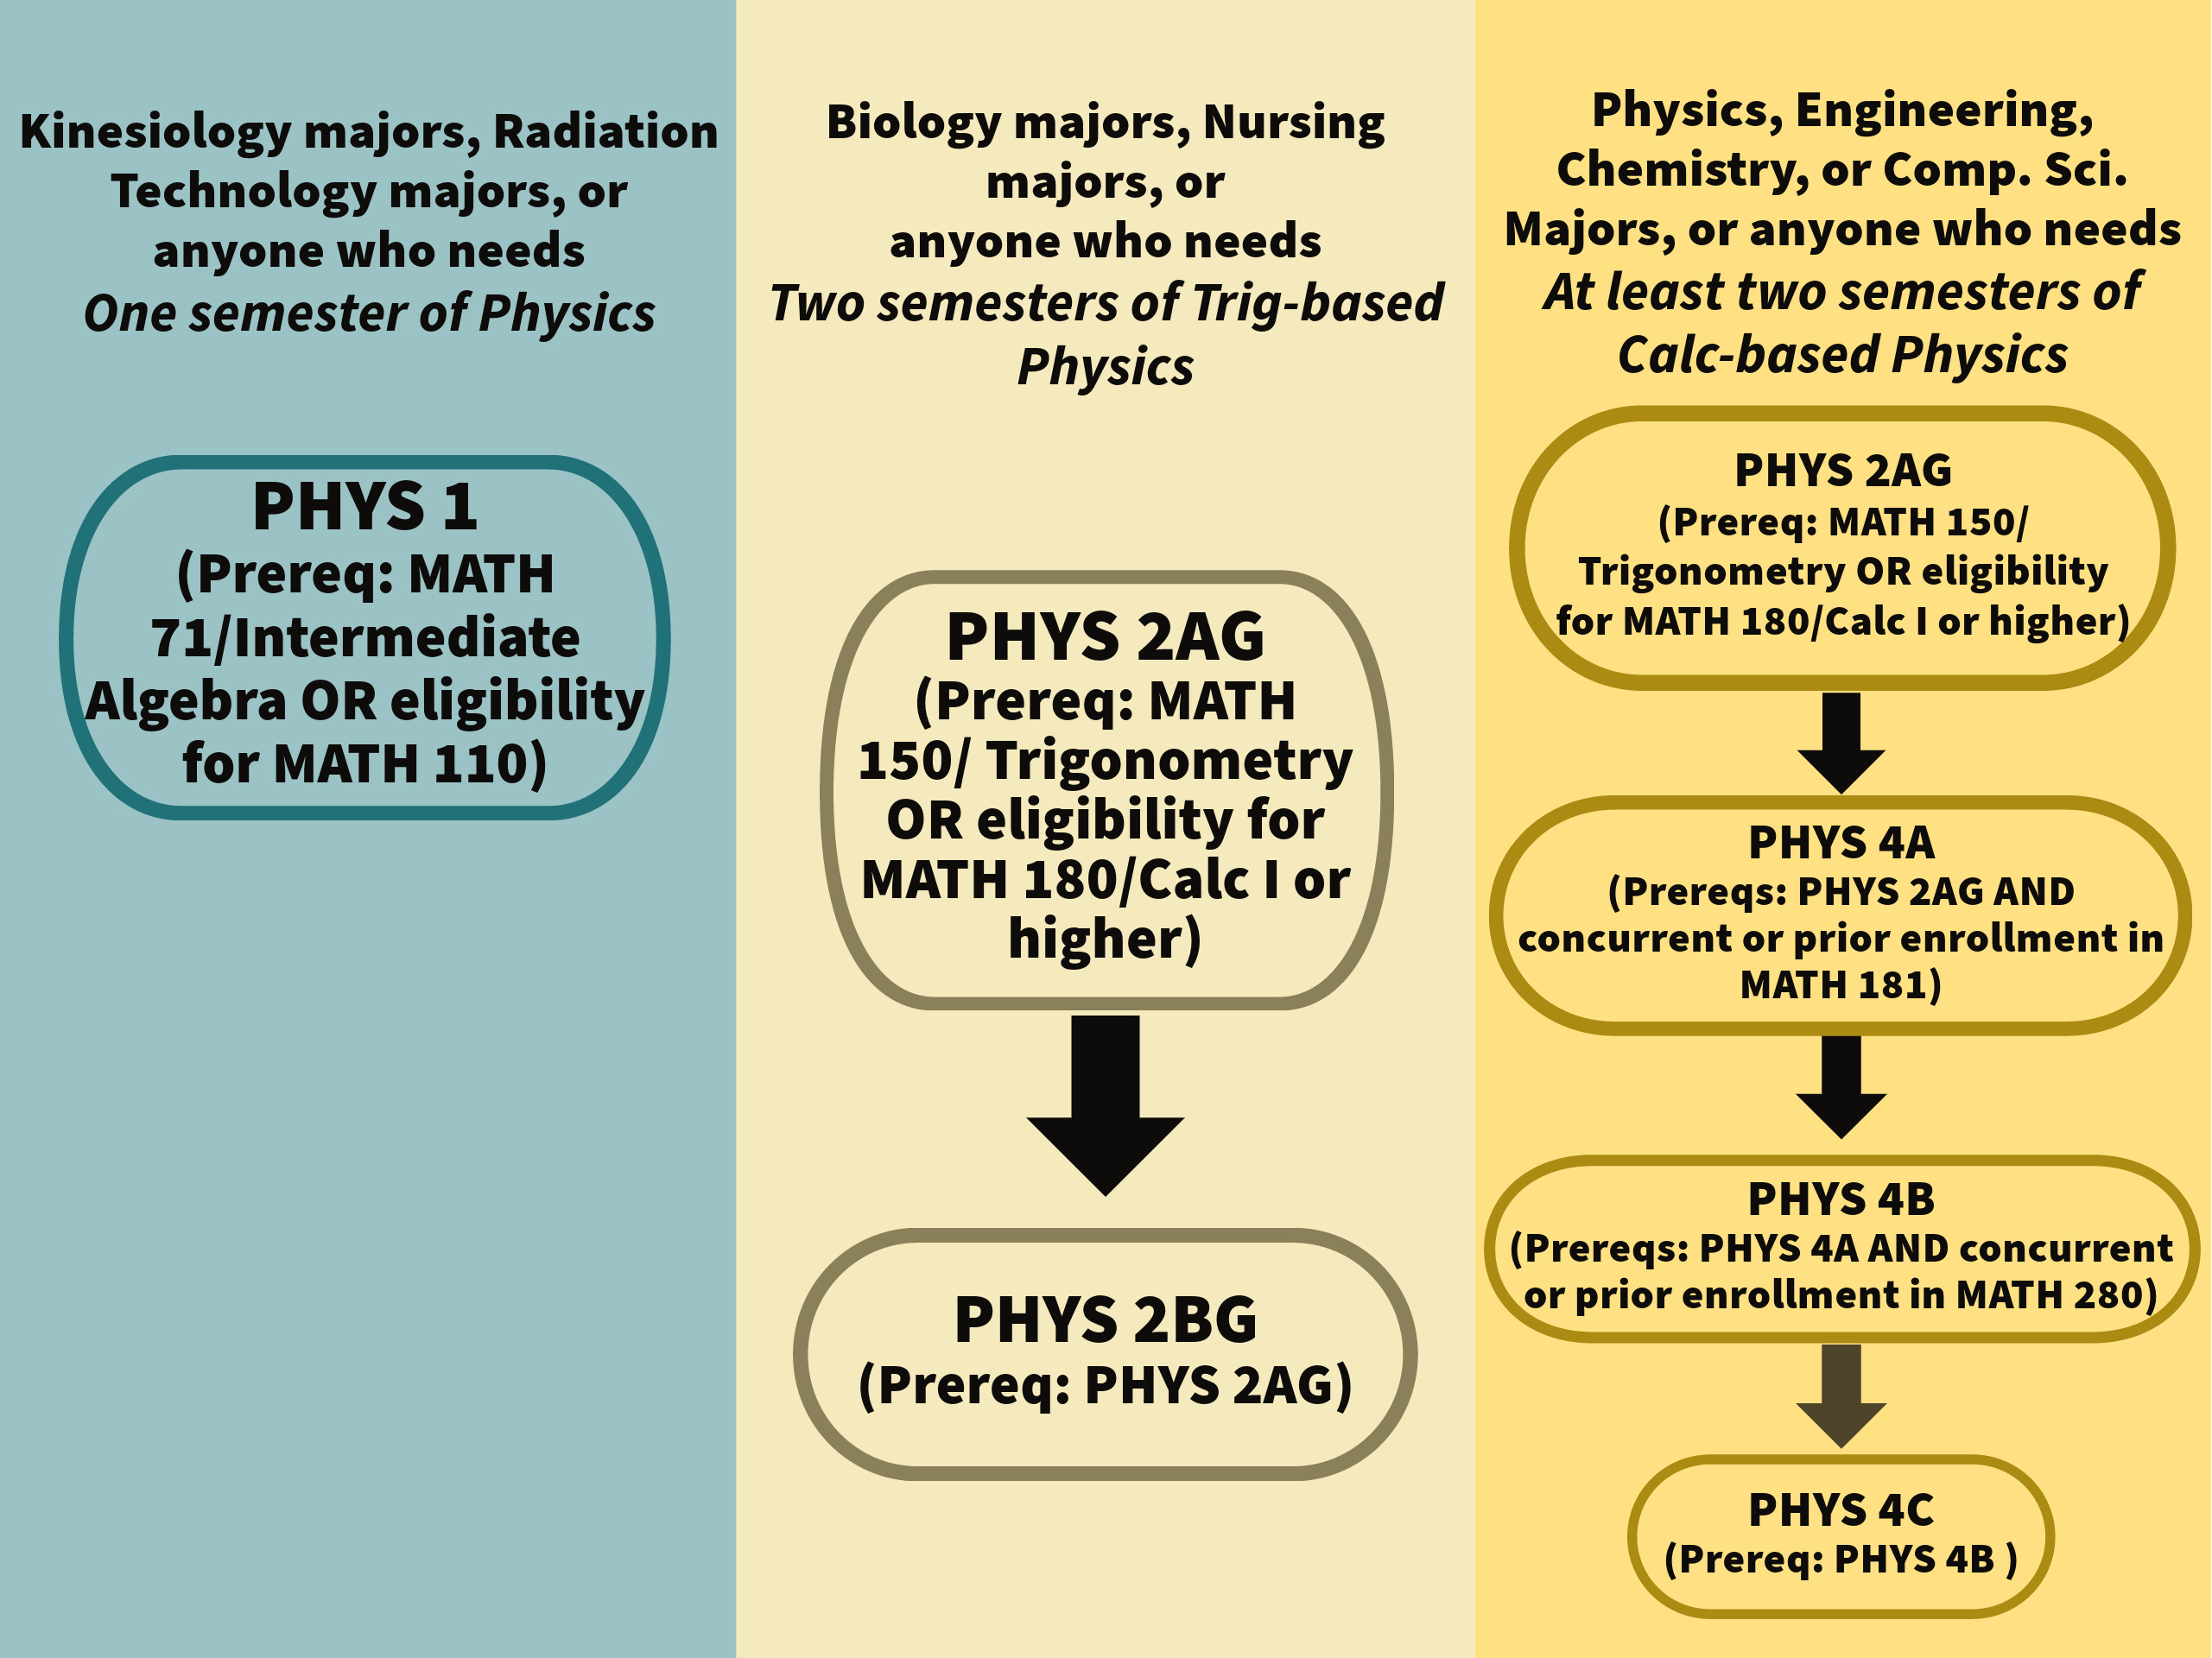 Flowchart showing 3 typical PHYS course sequences: 1 semester (PHYS 1 only), 2-semester trigonometry-based (PHYS 2AG followed by PHYS 2BG), or 2 to 3 semester calculus-based (PHYS 2AG, PHYS 4A, PHYS 4B, PHYS 4C)